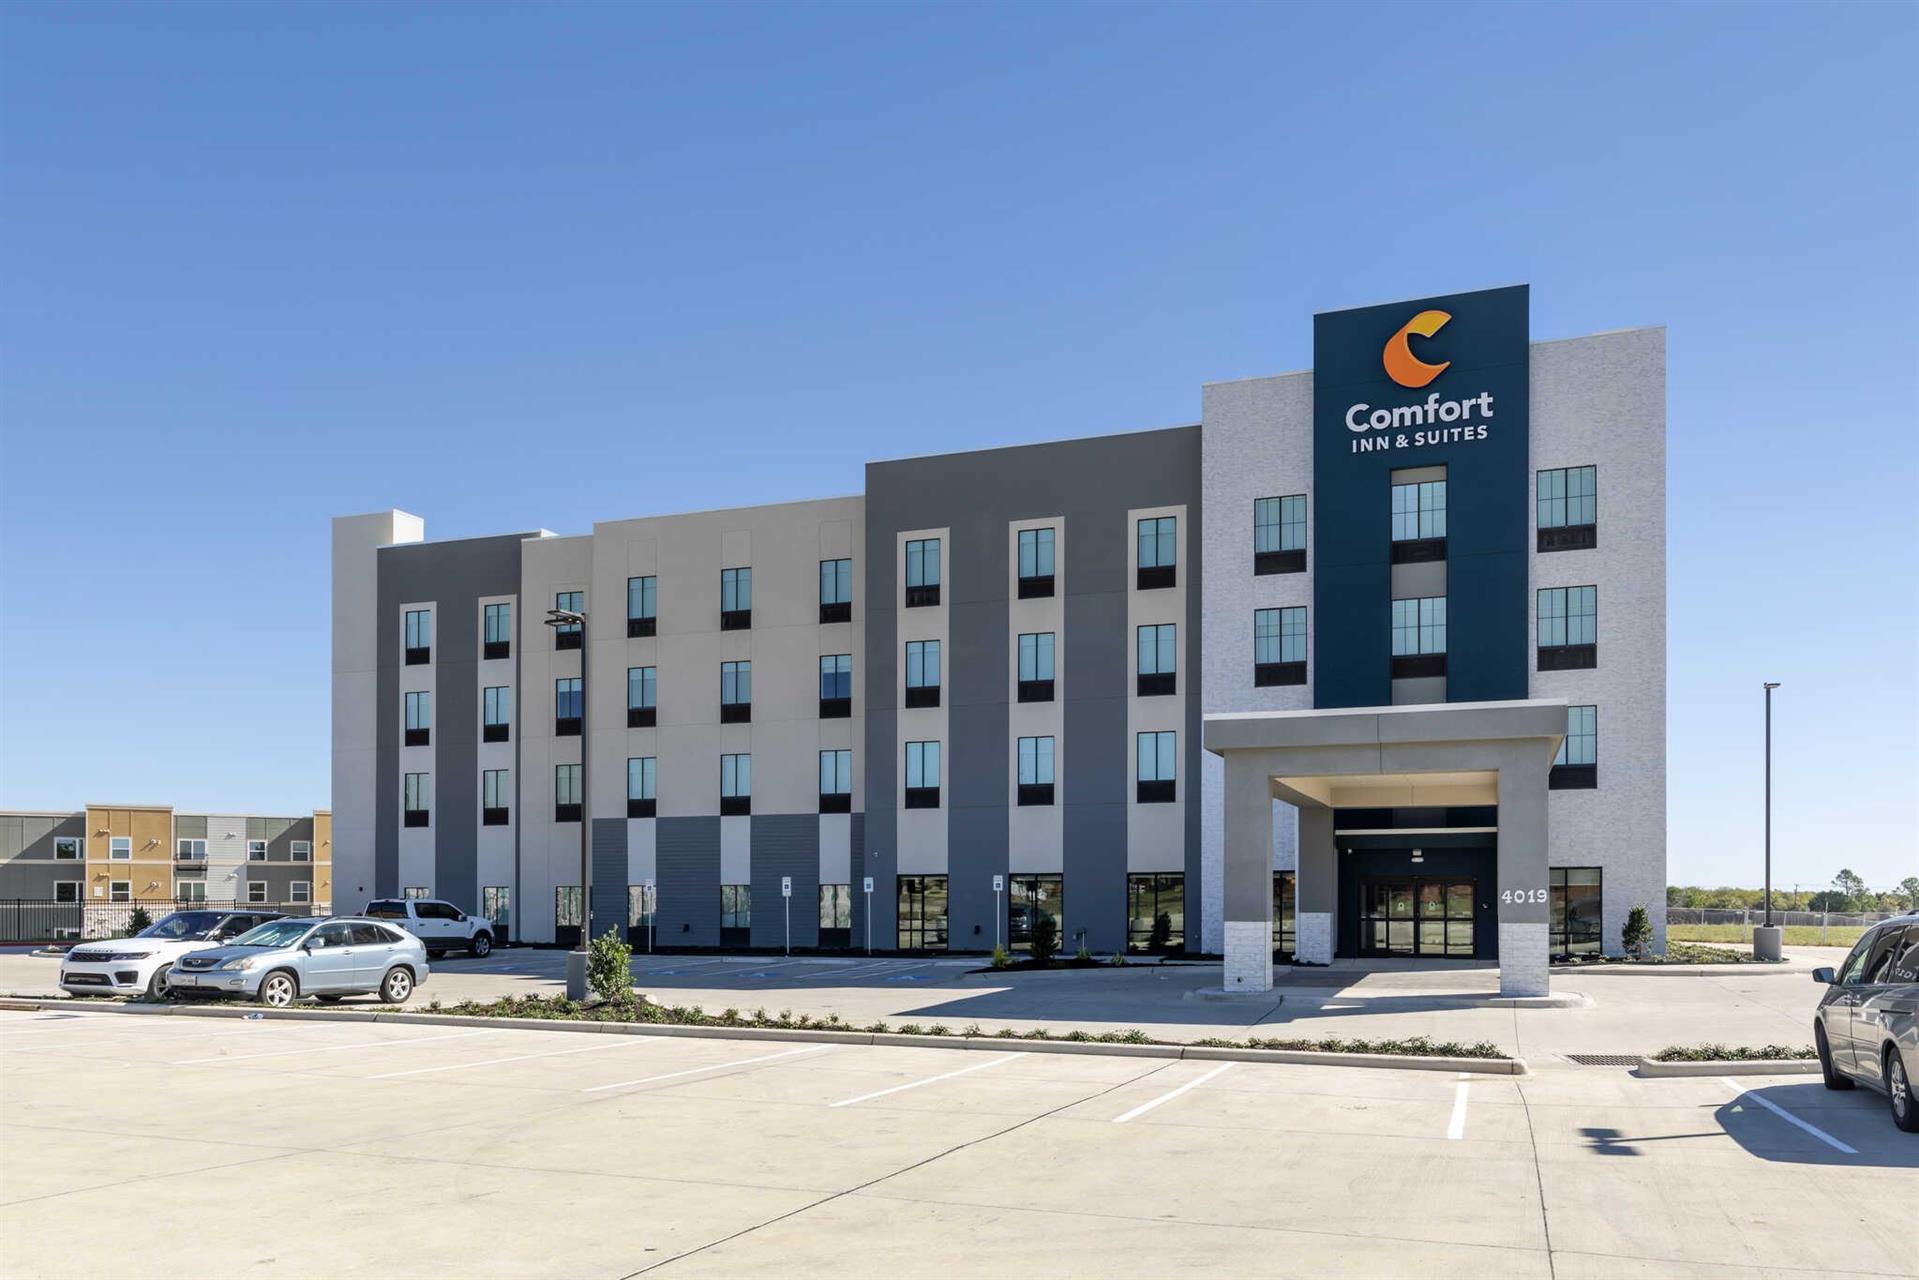 Comfort Inn and Suites Balch Springs in Balch Springs, TX